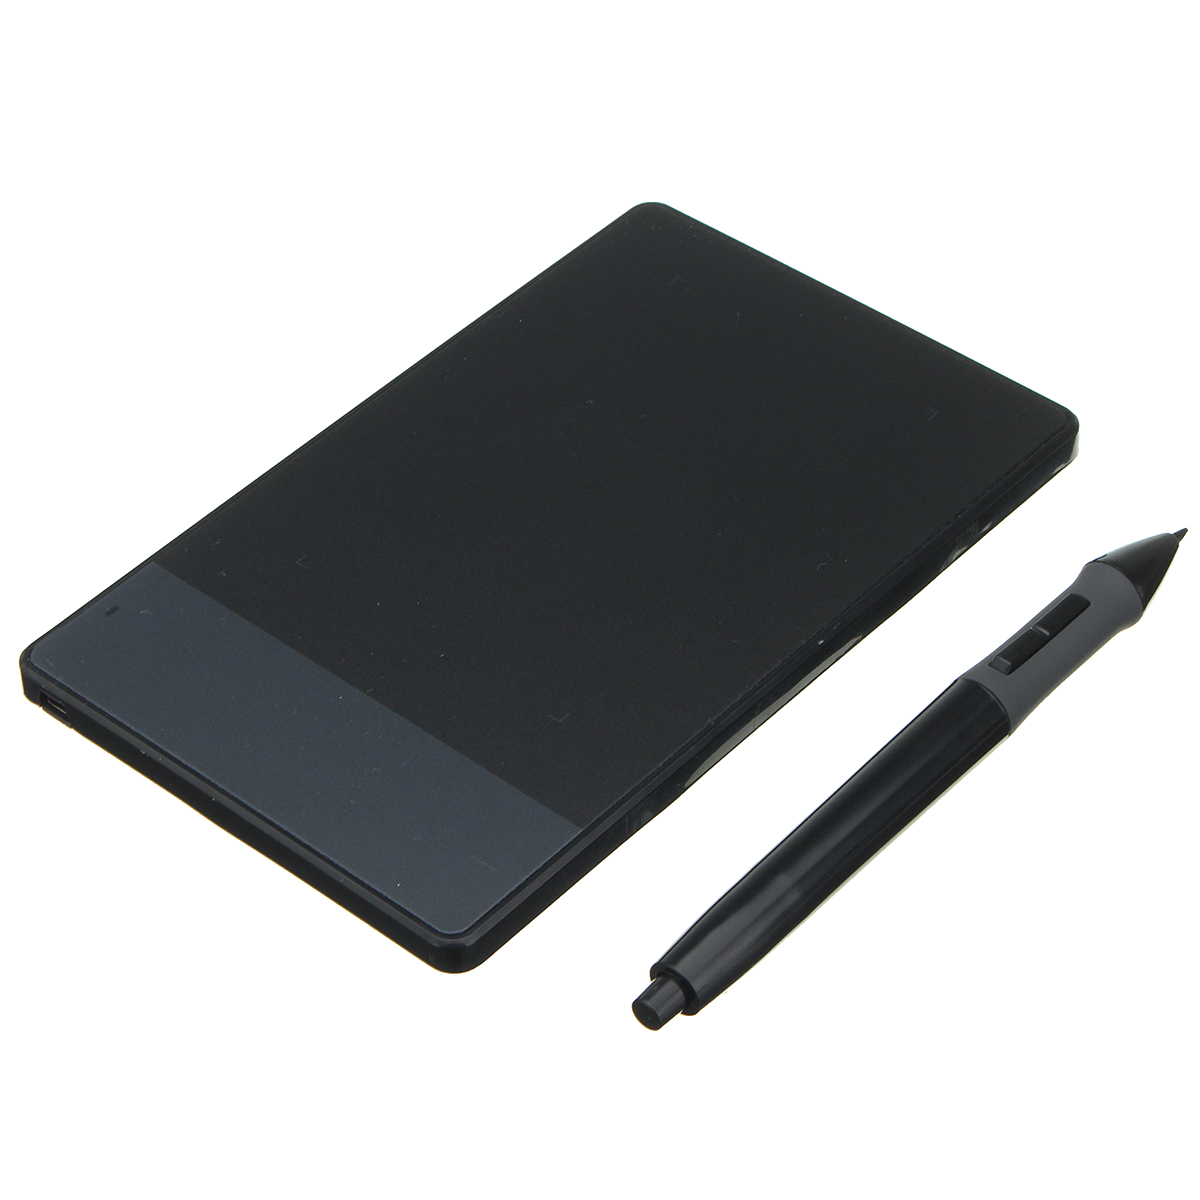 Huion h420 review